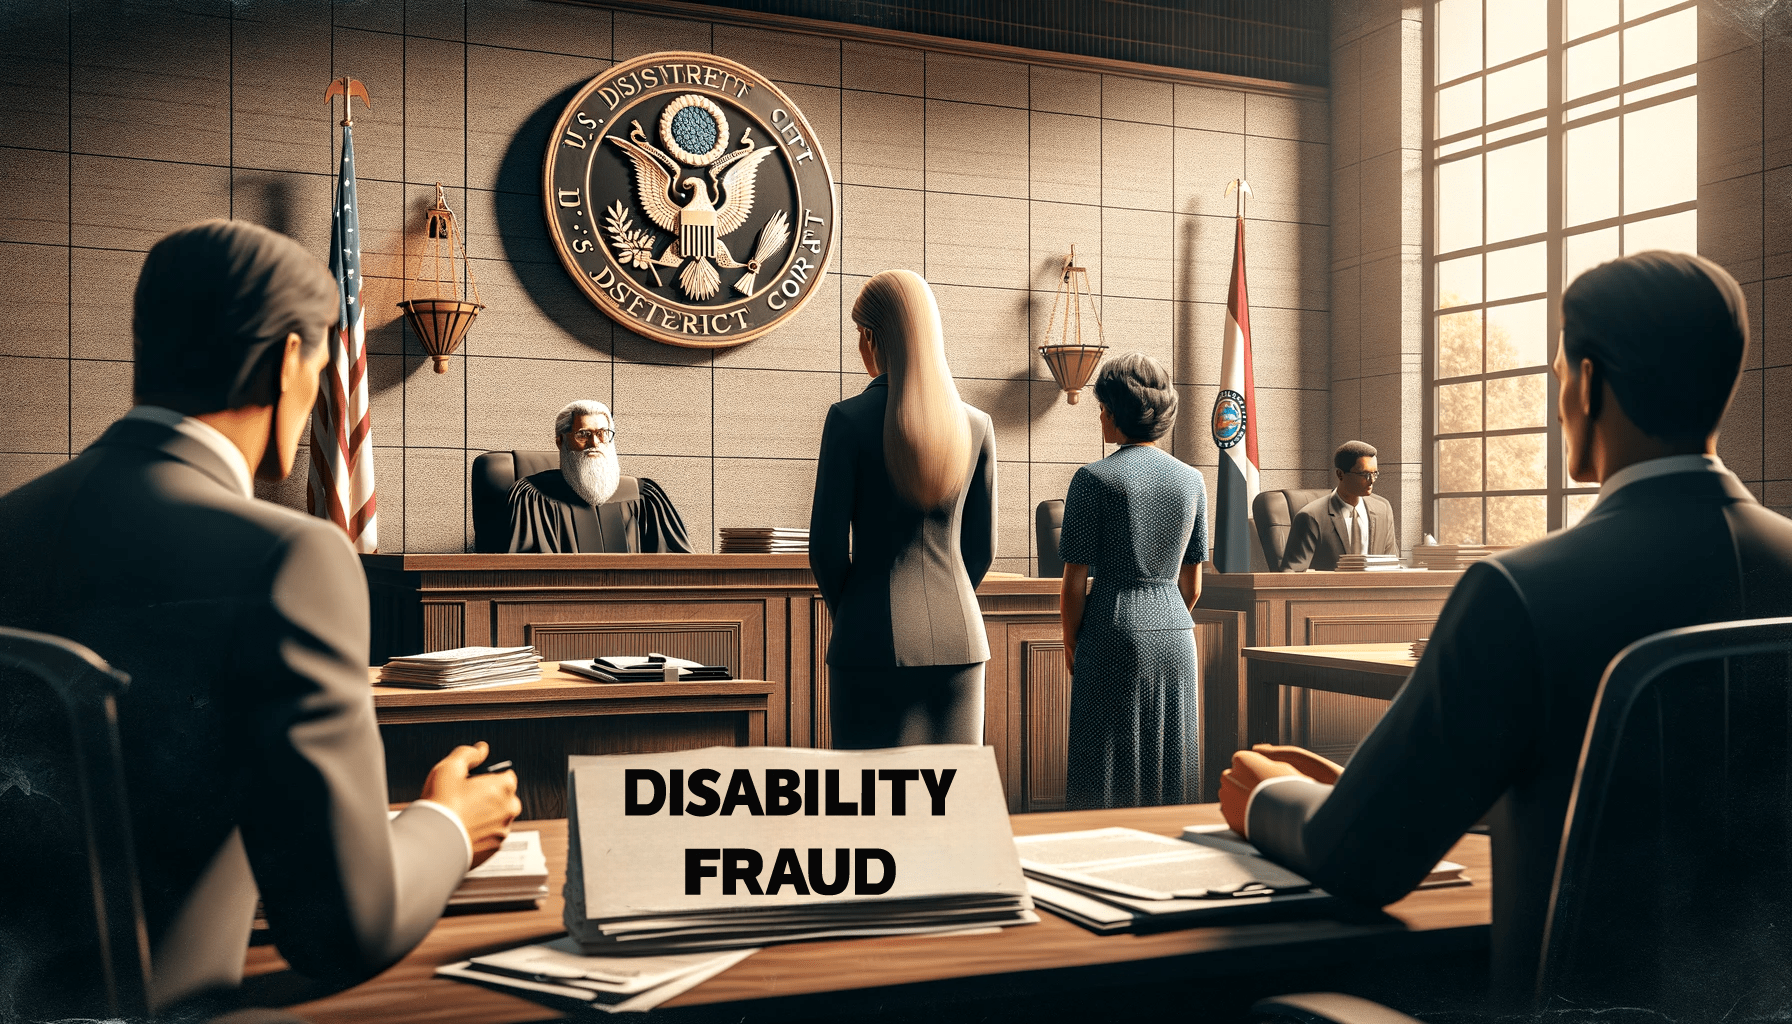 Disability Fraud News Graphic